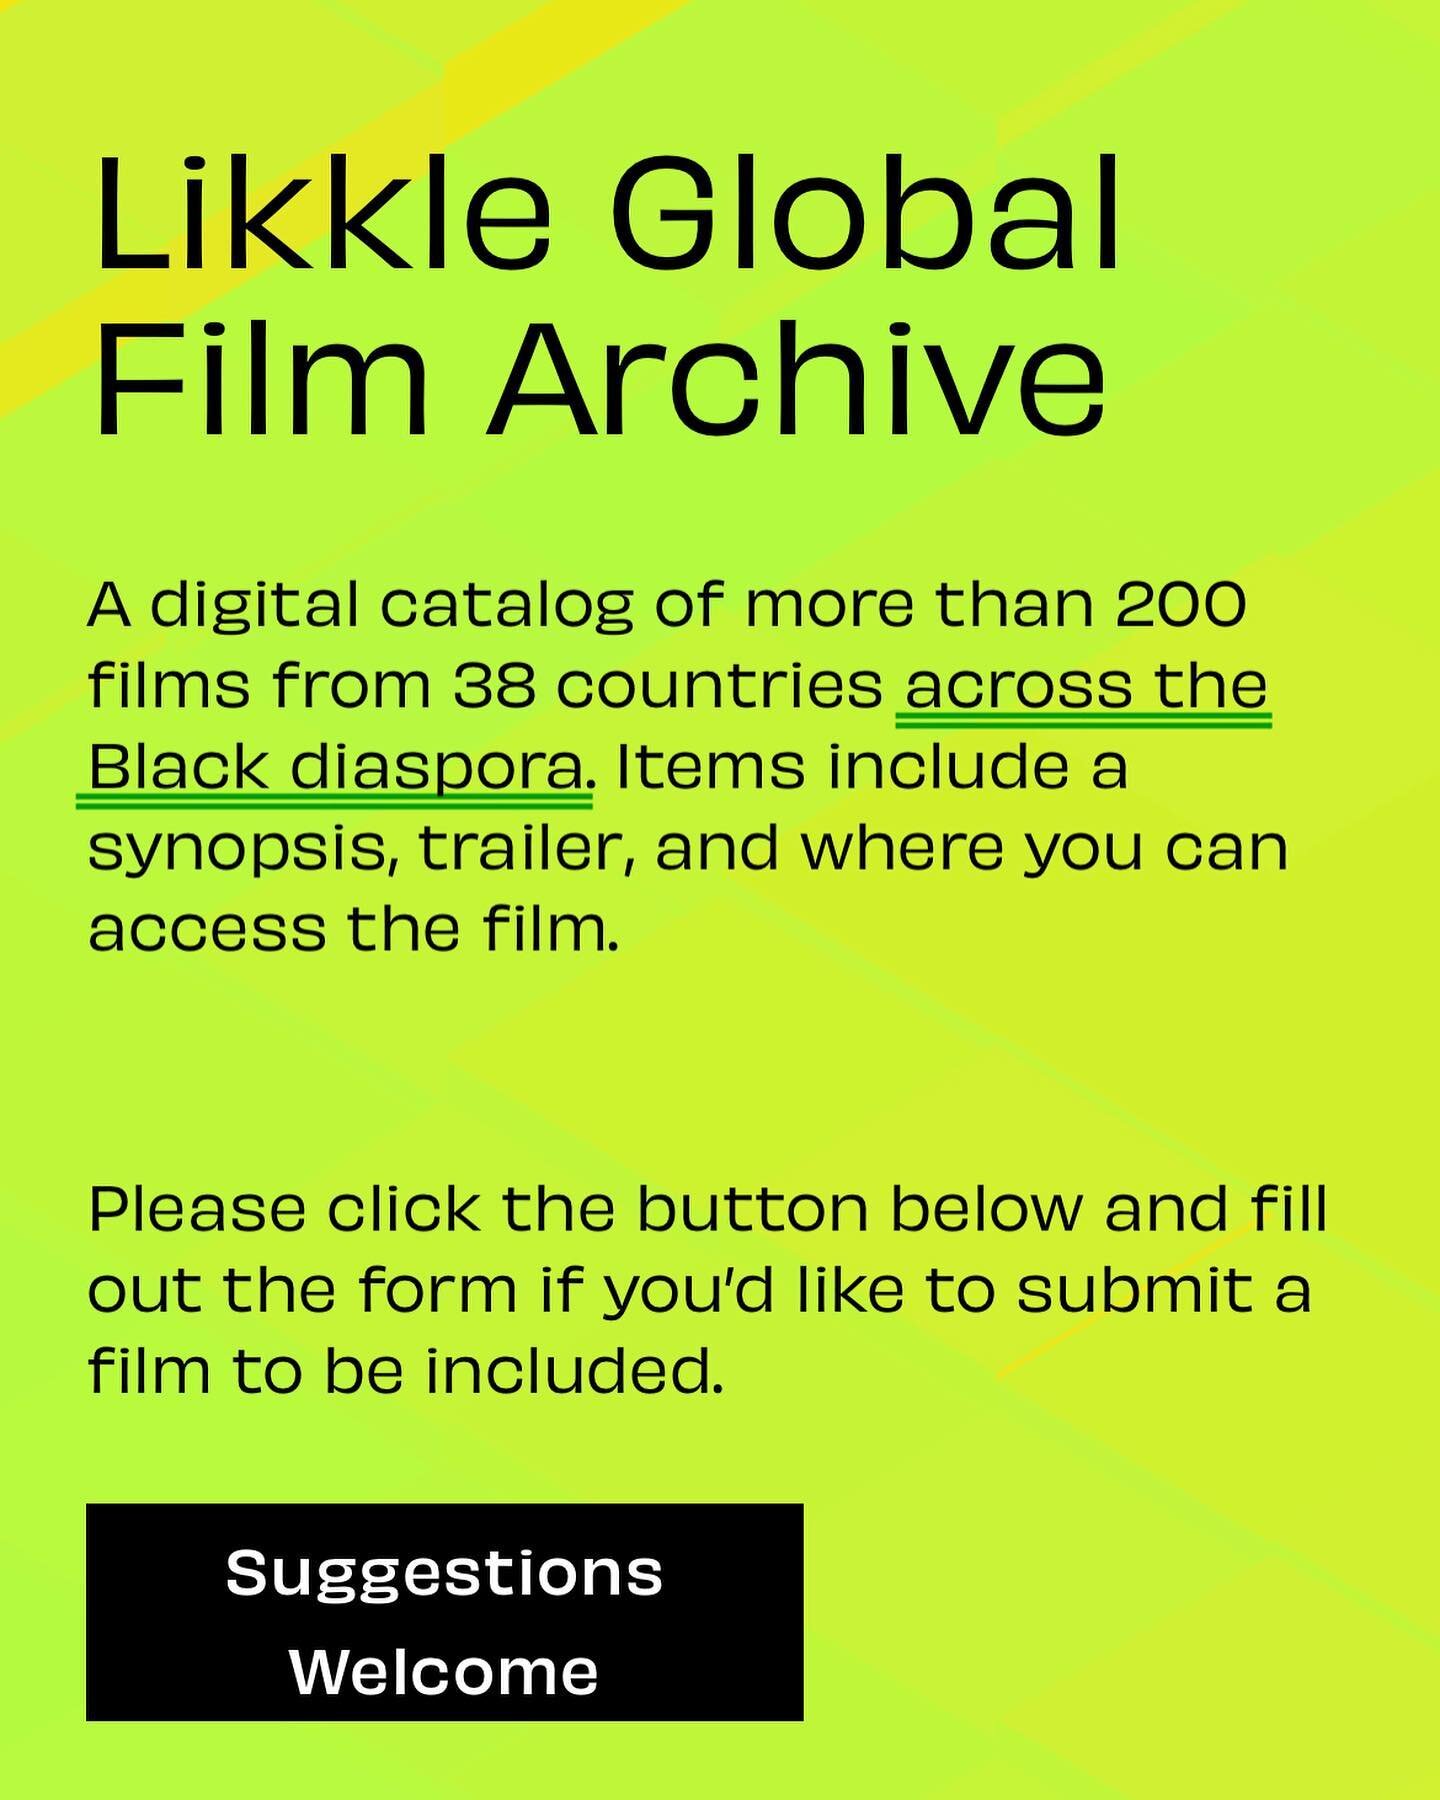 we&rsquo;re proud to announce the launch of our Likkle Global Film Archive, a digital film archive which provides access to hundreds of films of all genres from across the black diaspora! 

new films will be regularly added. we also welcome suggestio